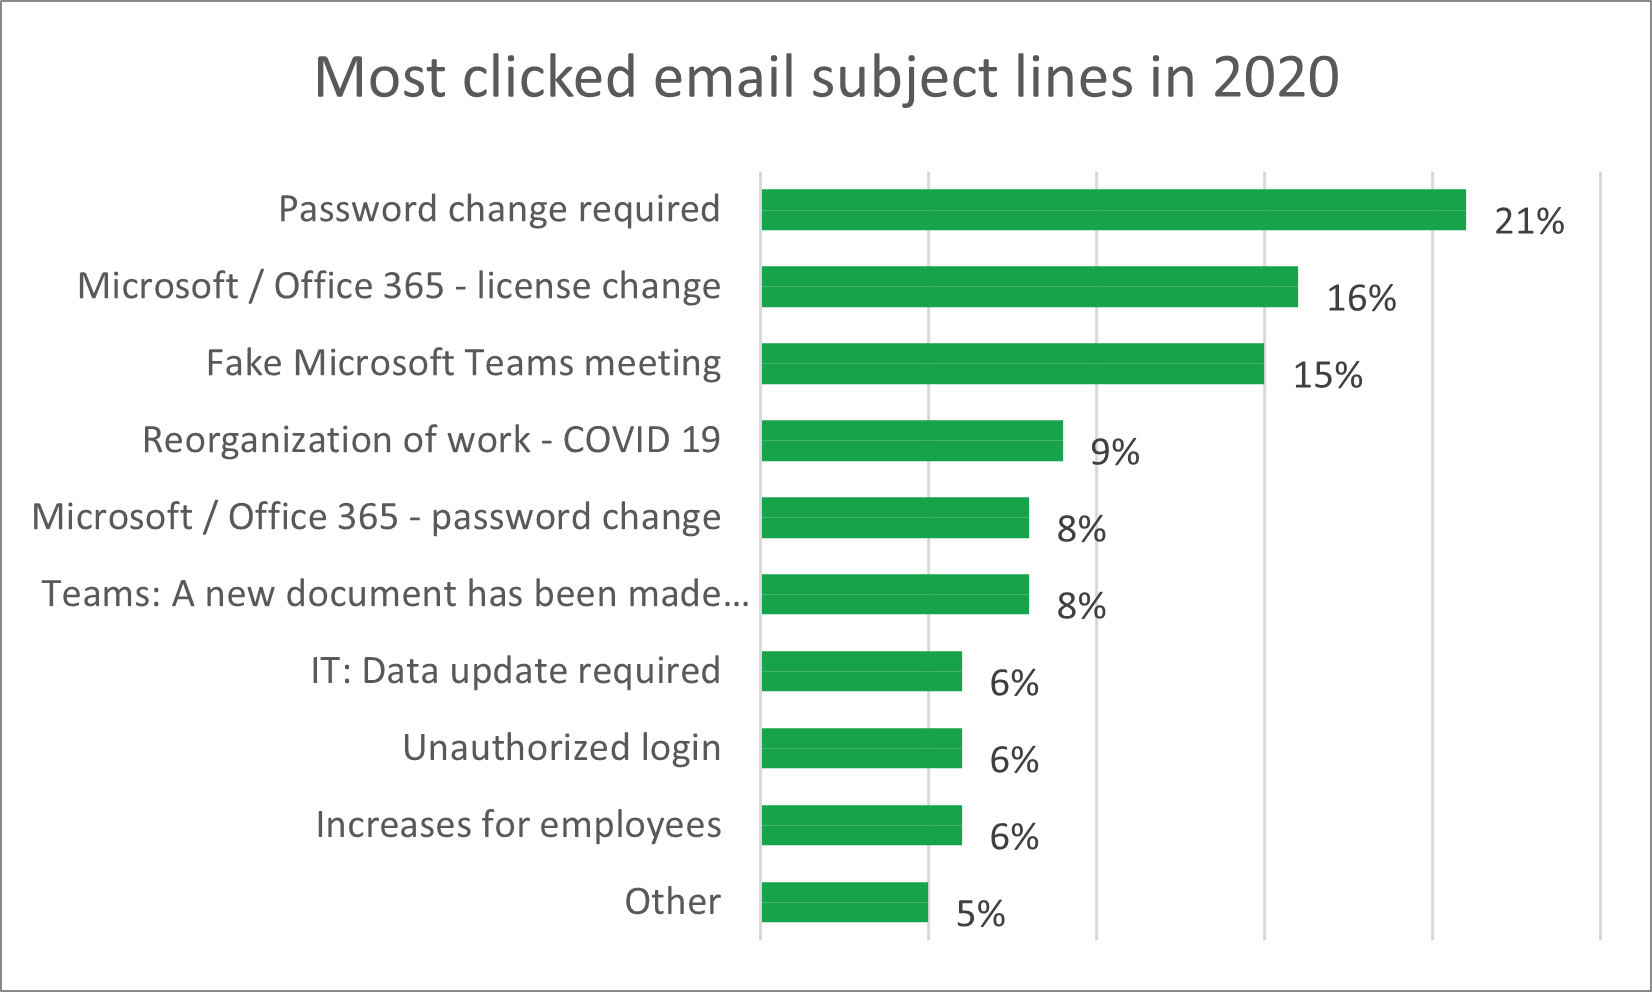 Most clicked email subject lines in 2020.